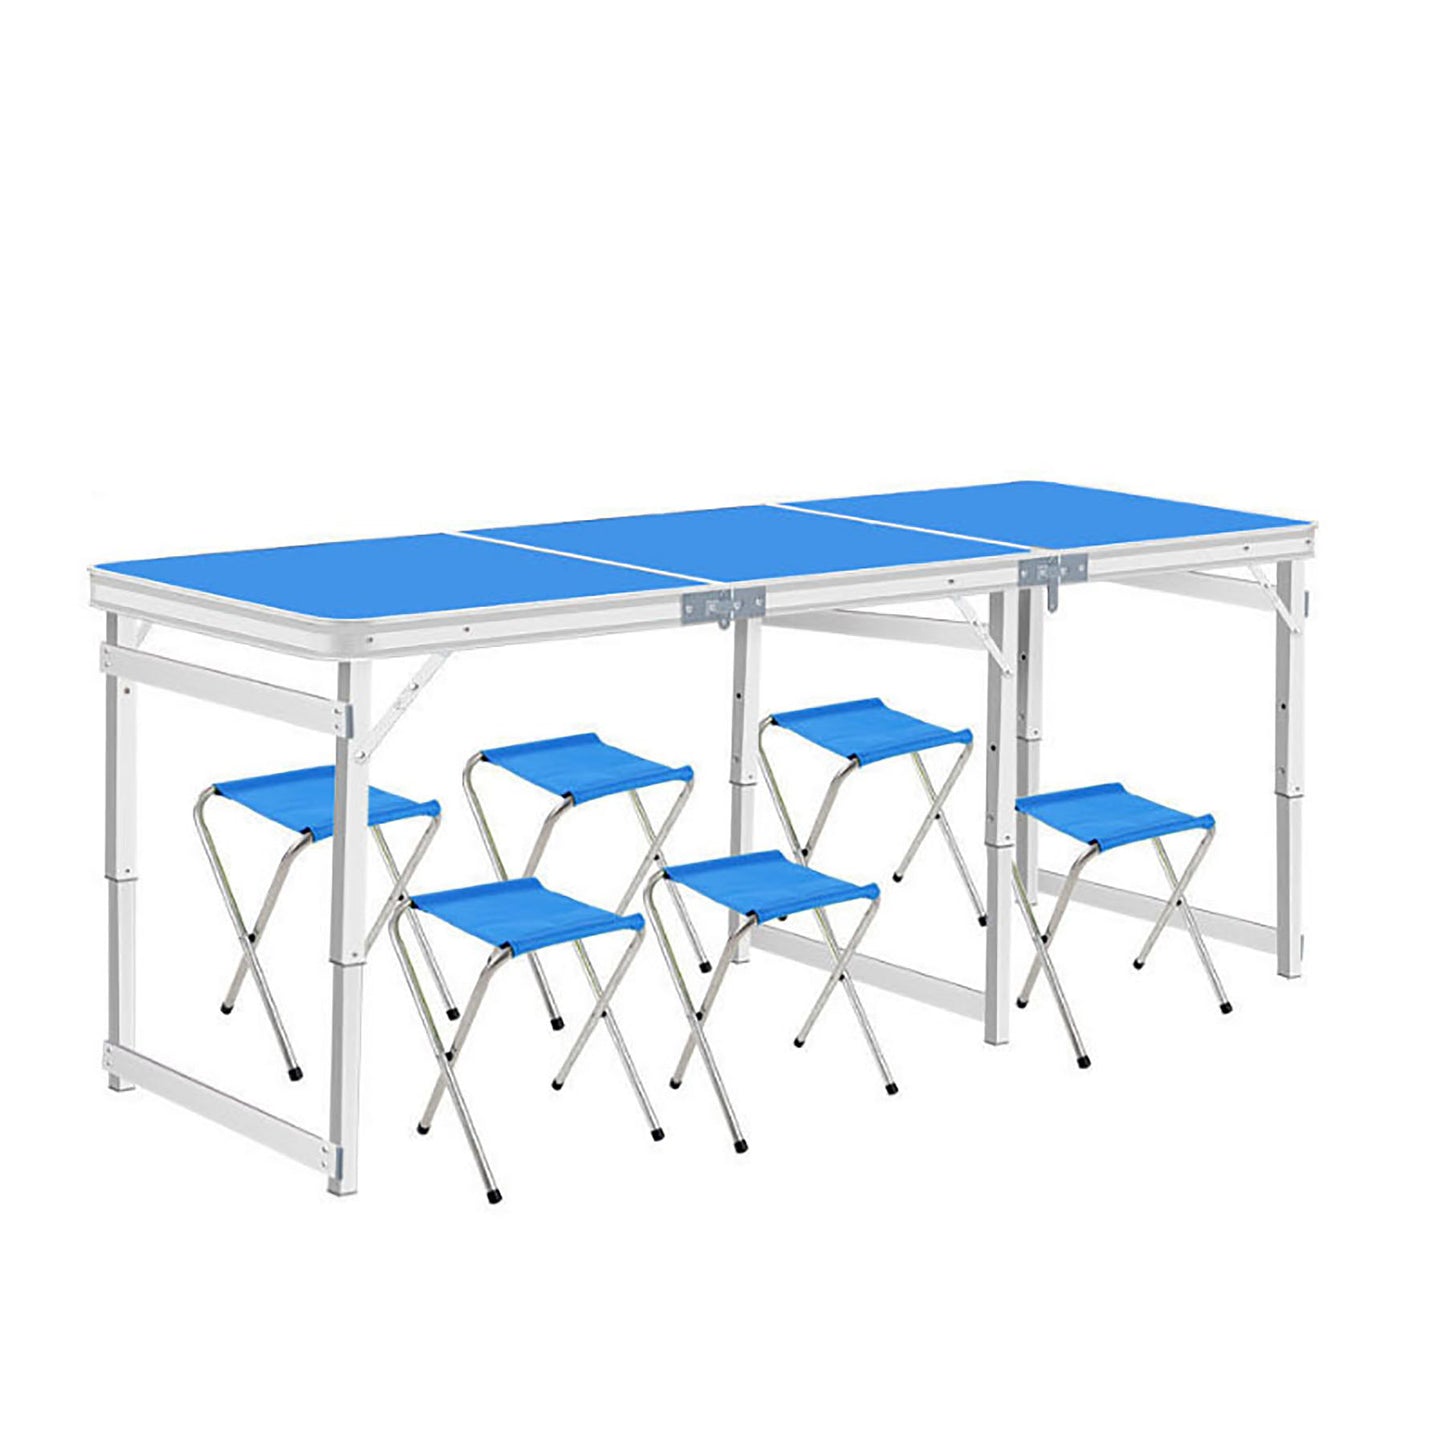 Folding table+6 Aluminum chairs